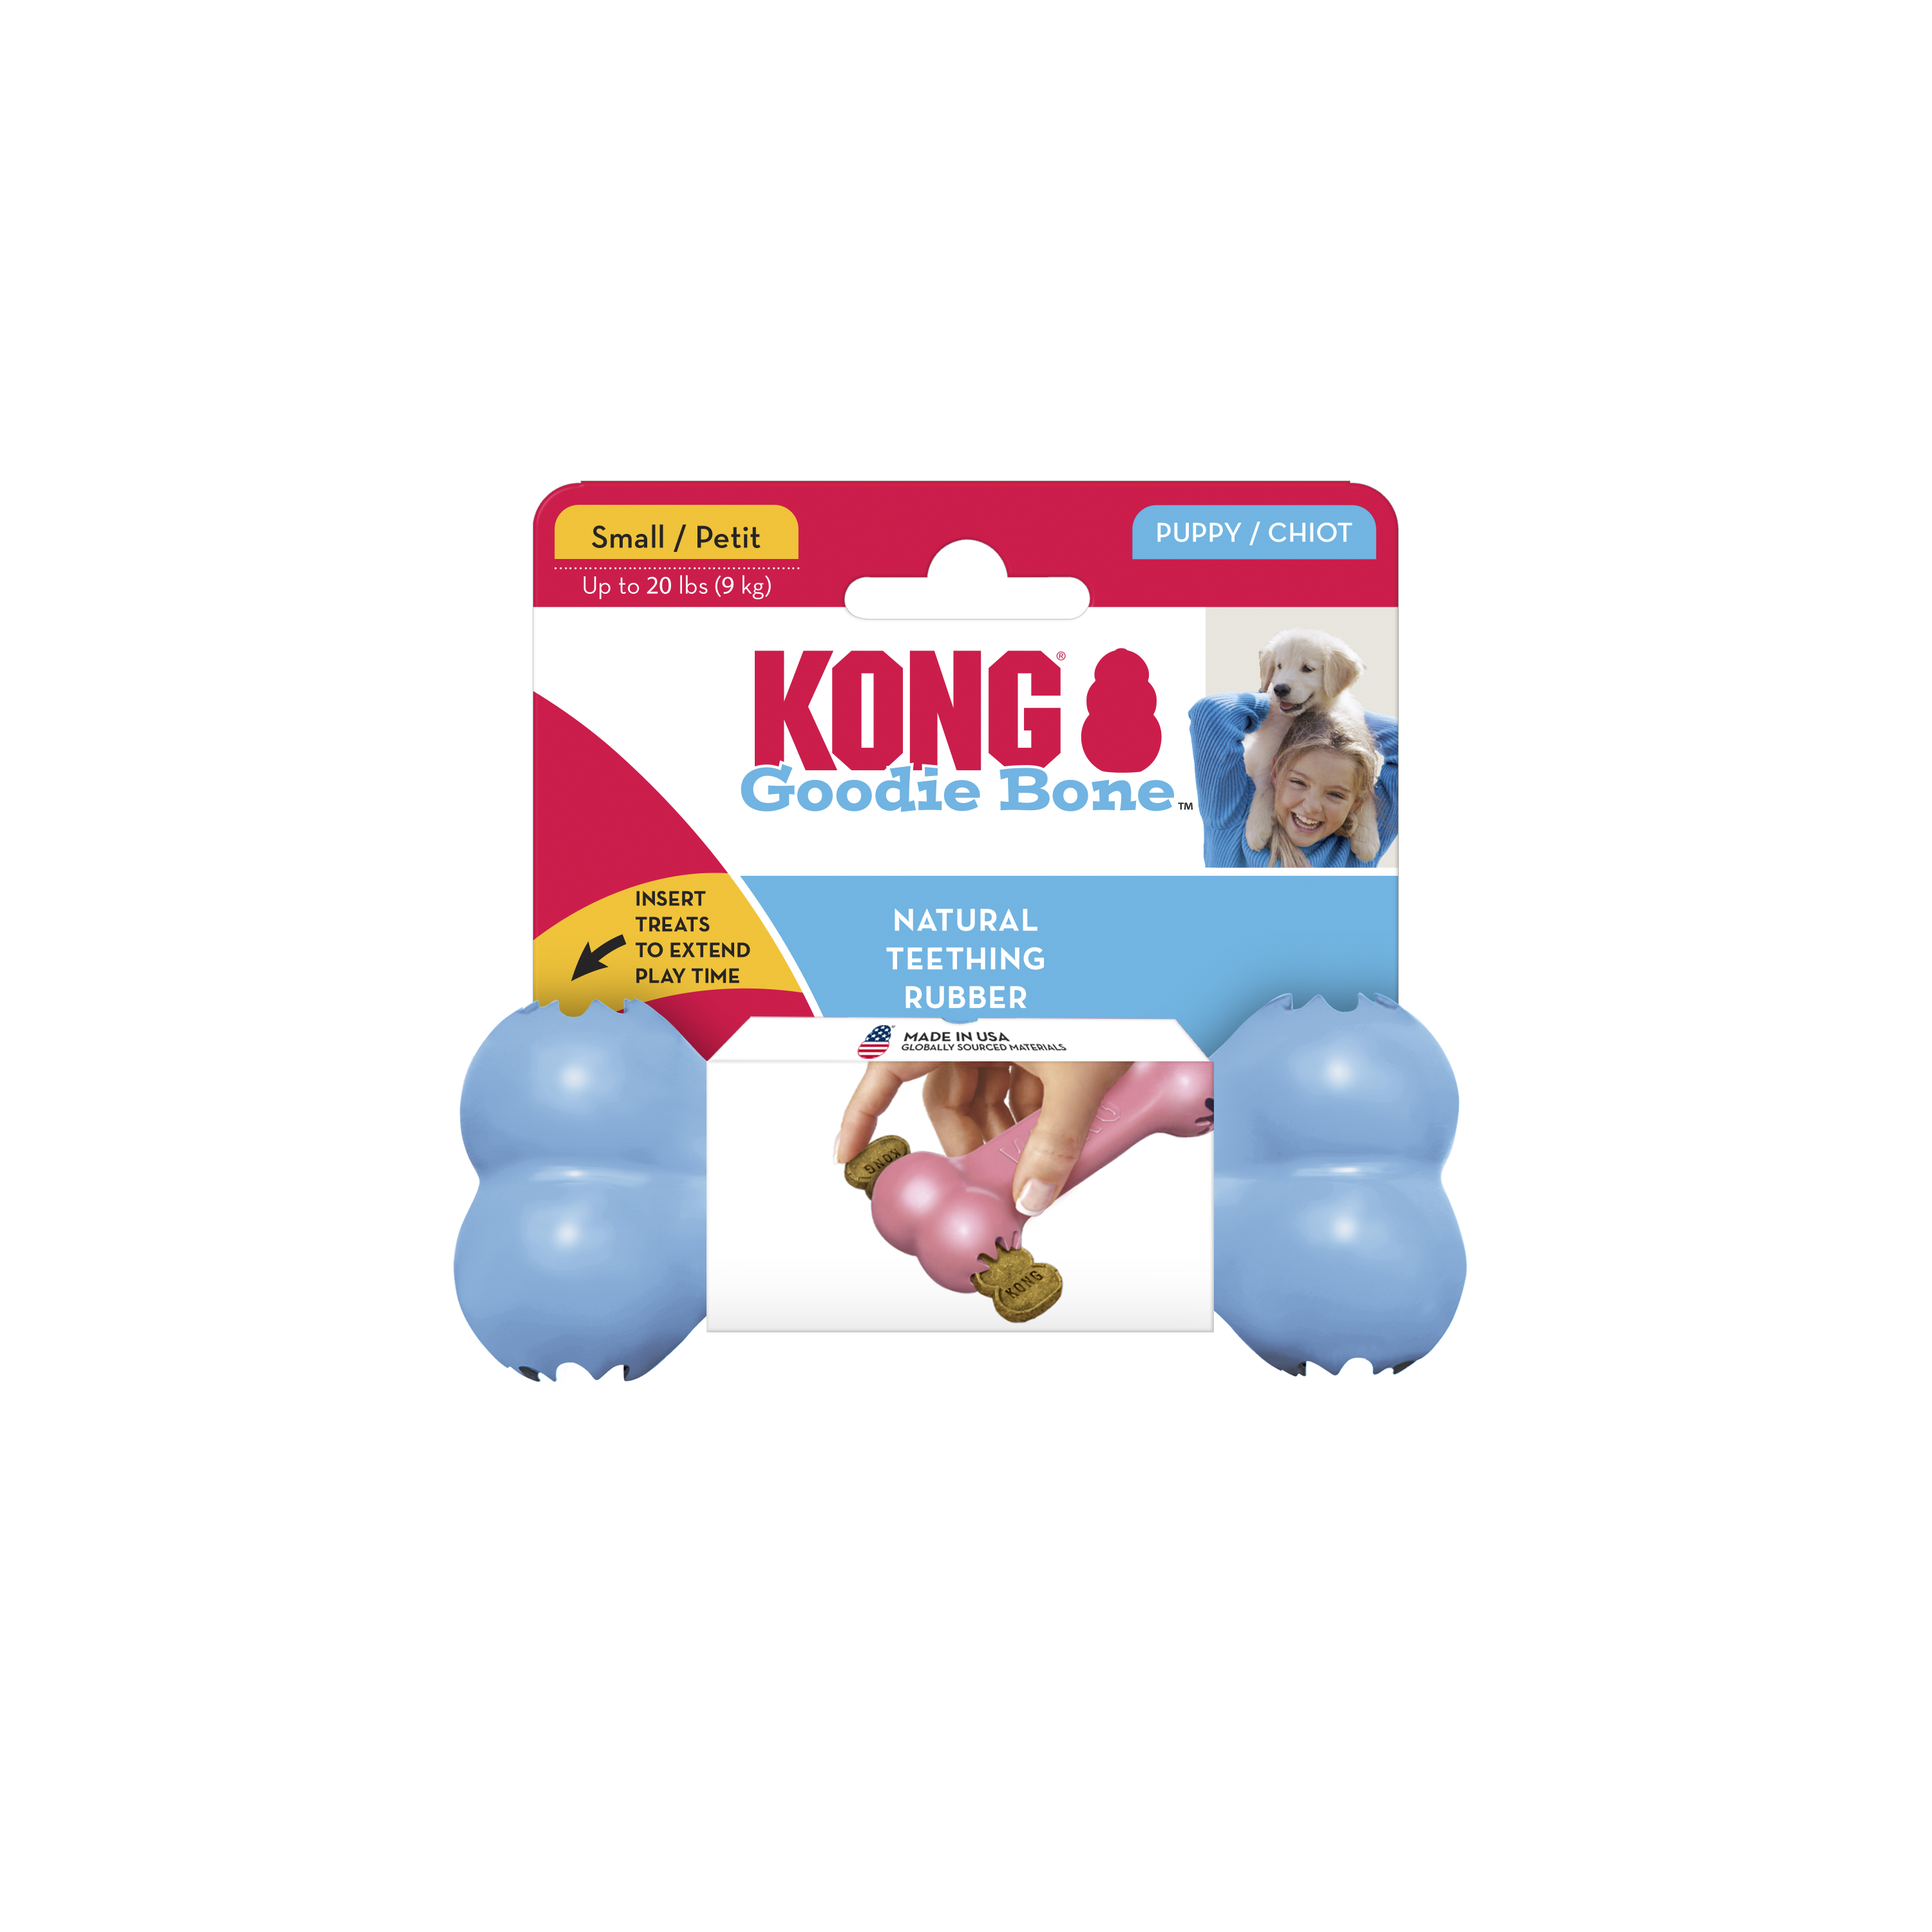 KONG Puppy Goodie Bone onpack product image